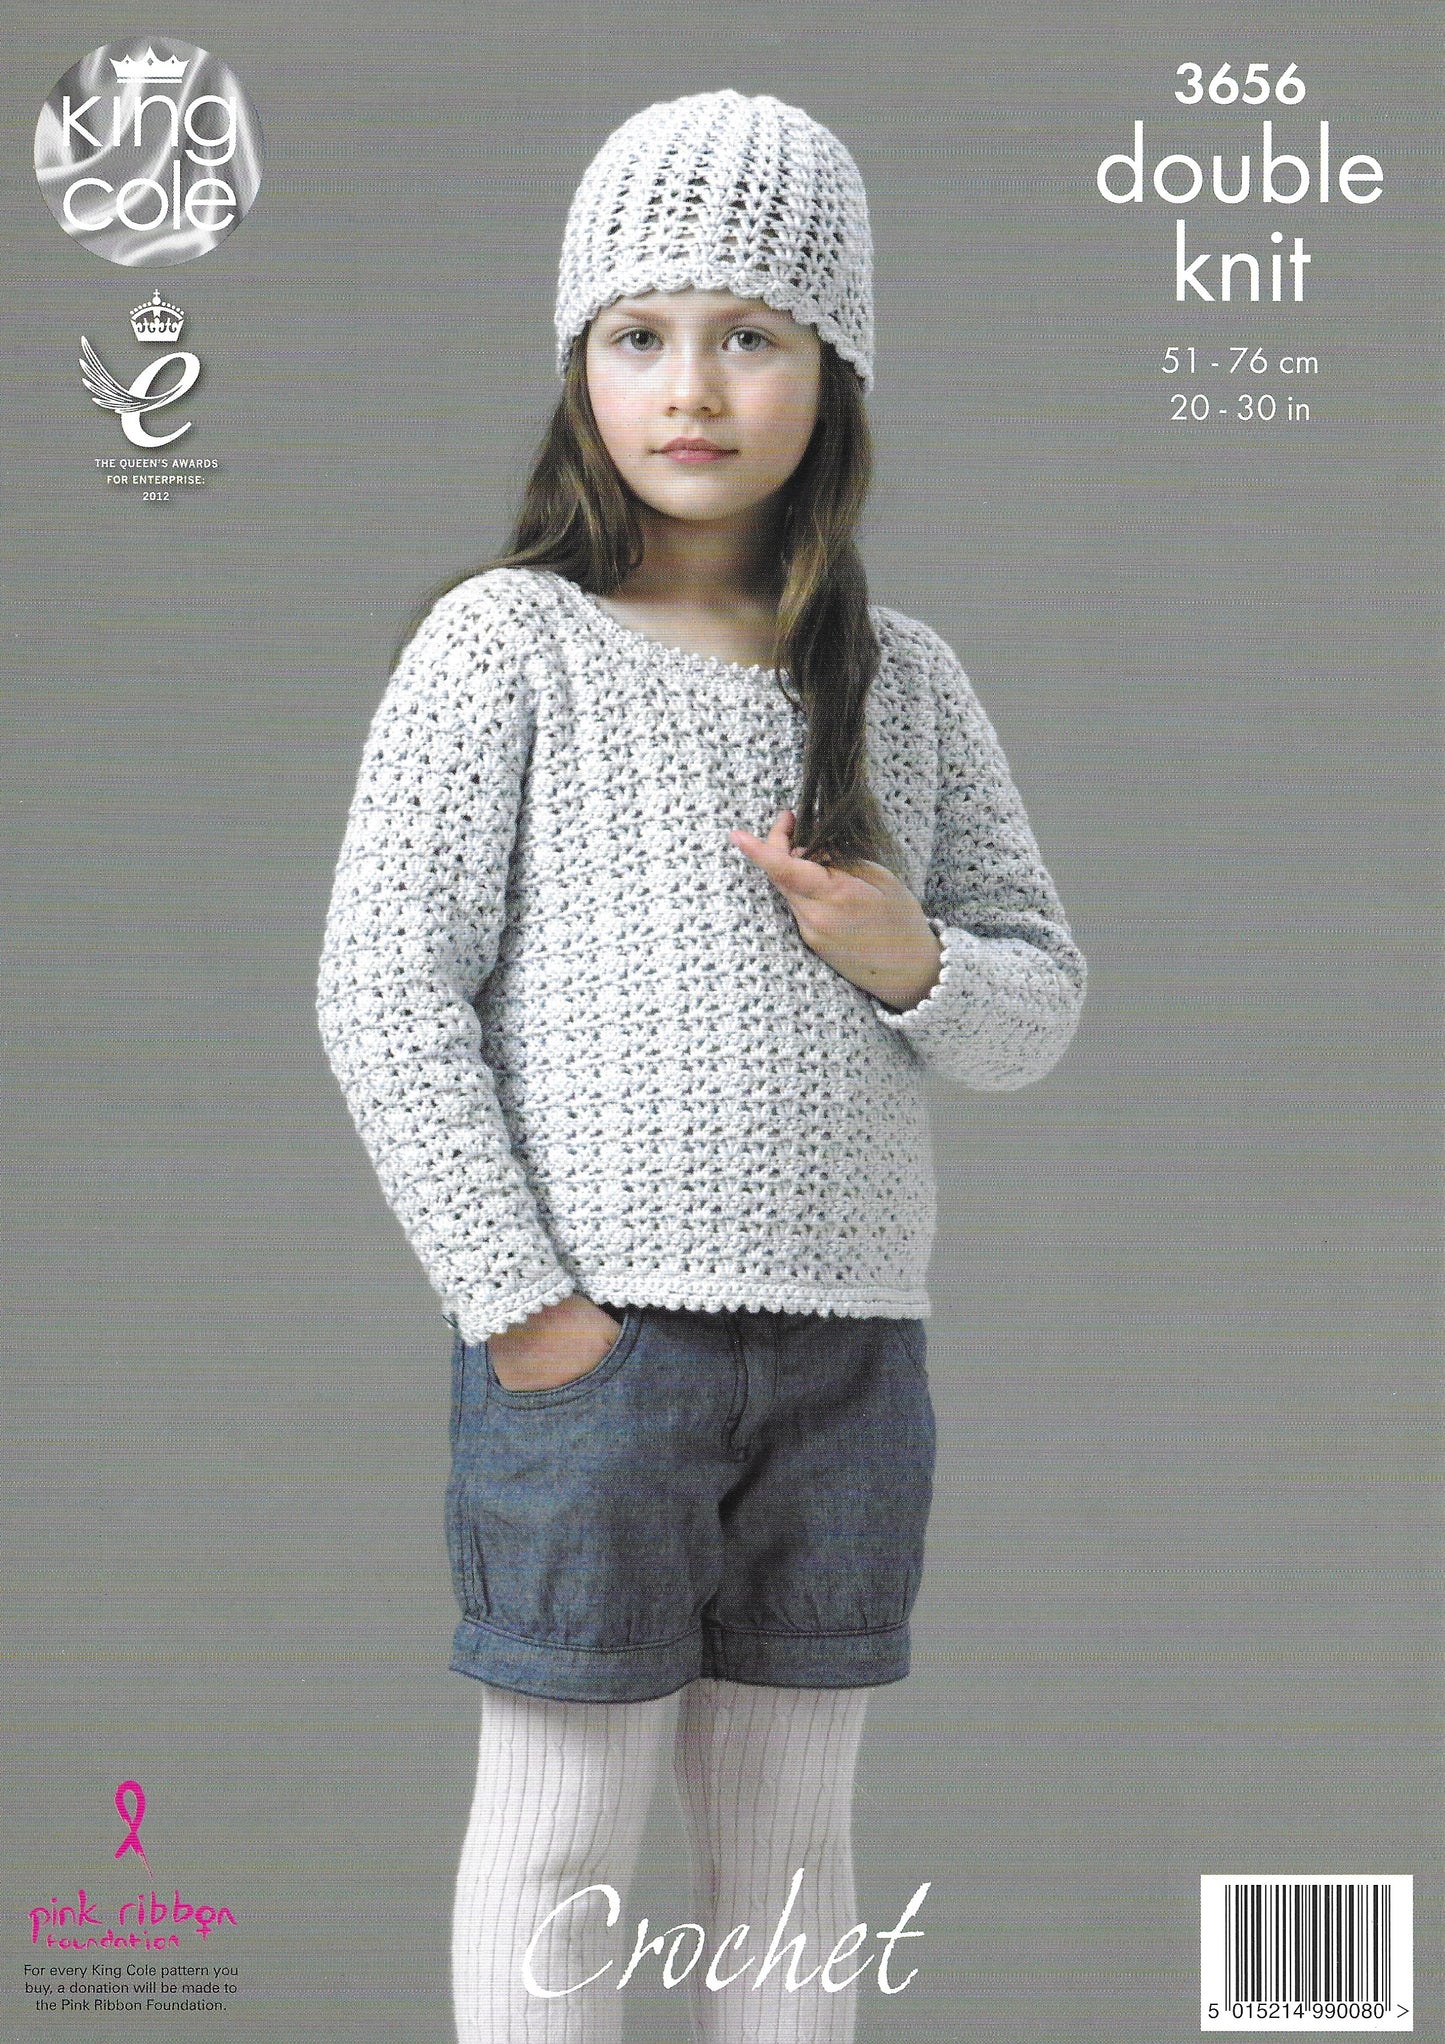 King Cole 3656 Cardigan Sweater and Hat DK Crochet Pattern